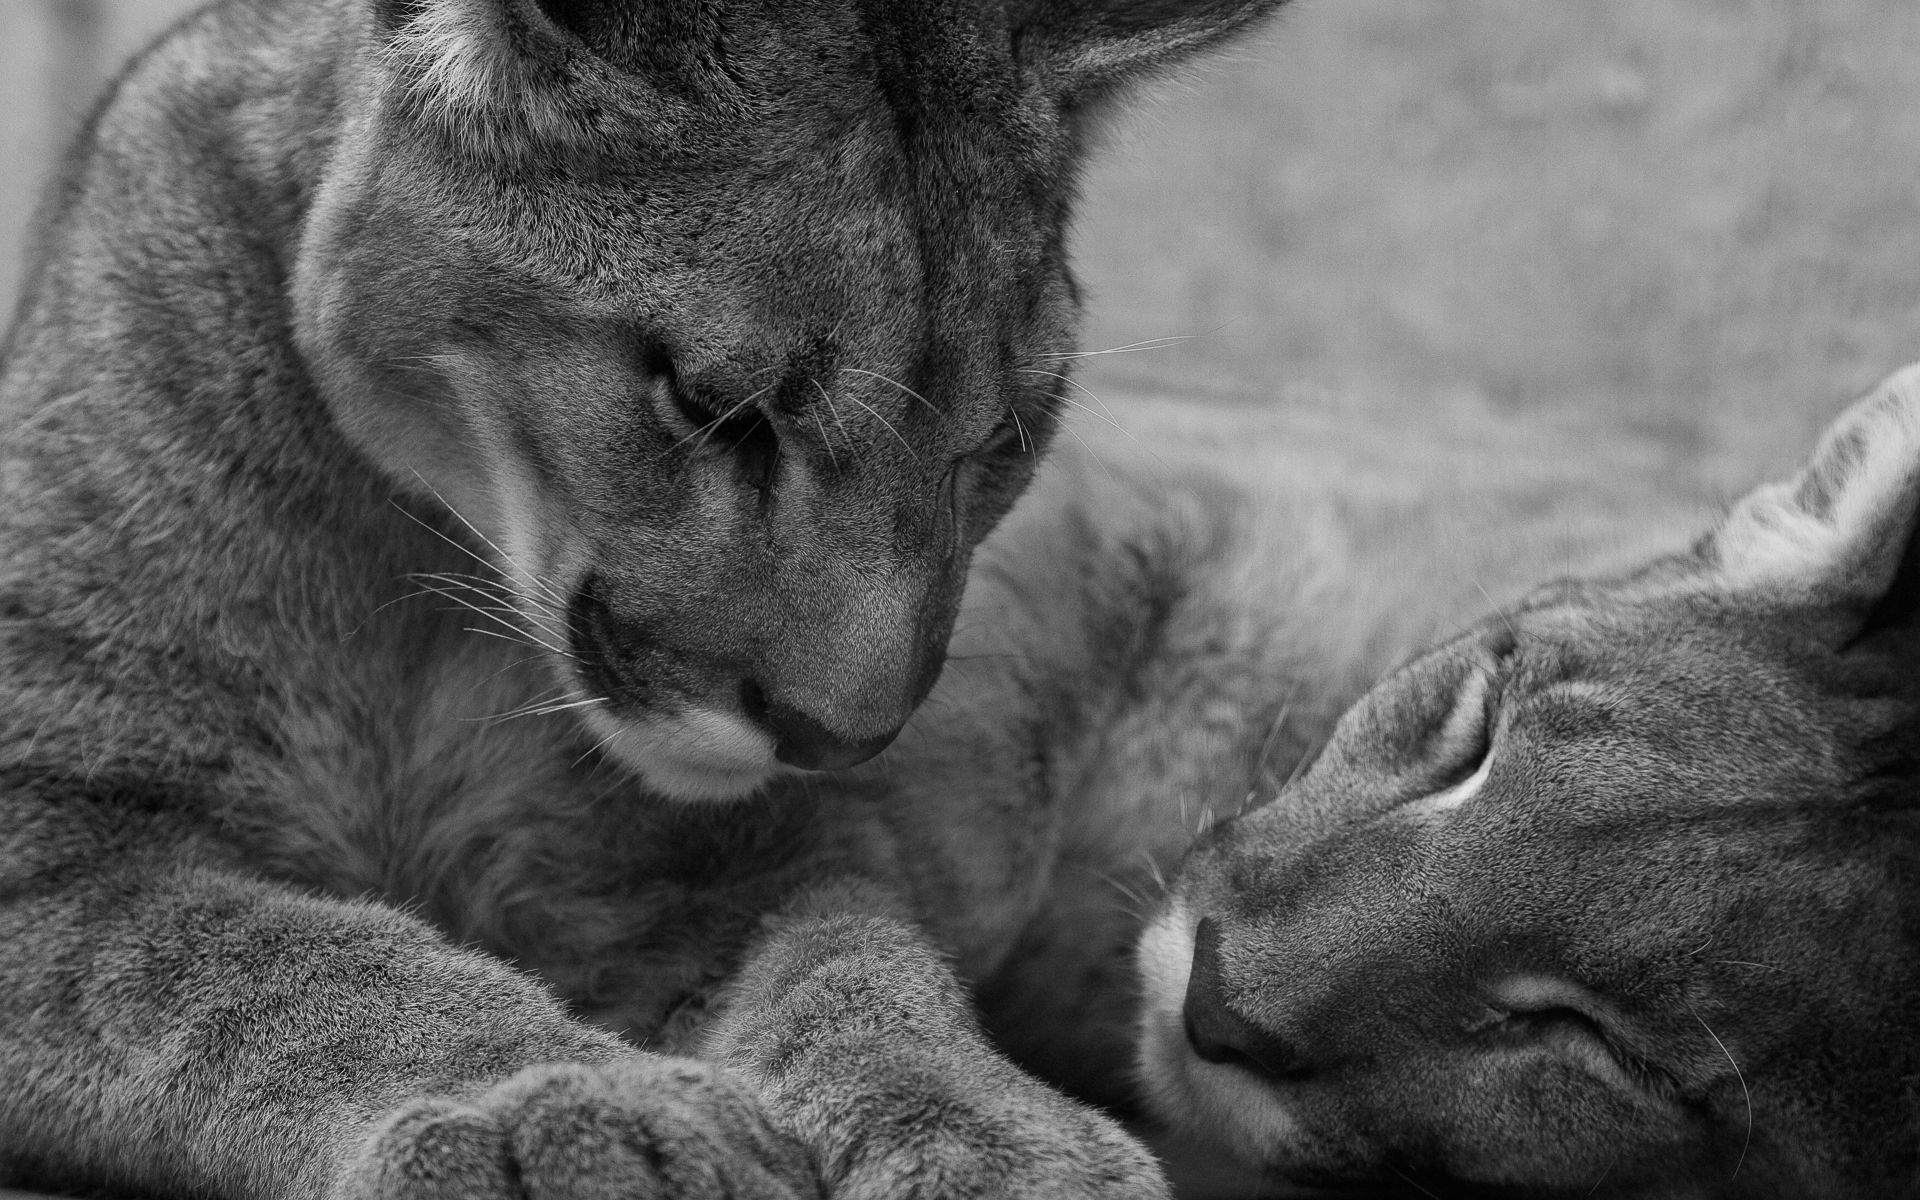 care, lions, animals, to lie down, lie, muzzle, bw, chb lock screen backgrounds